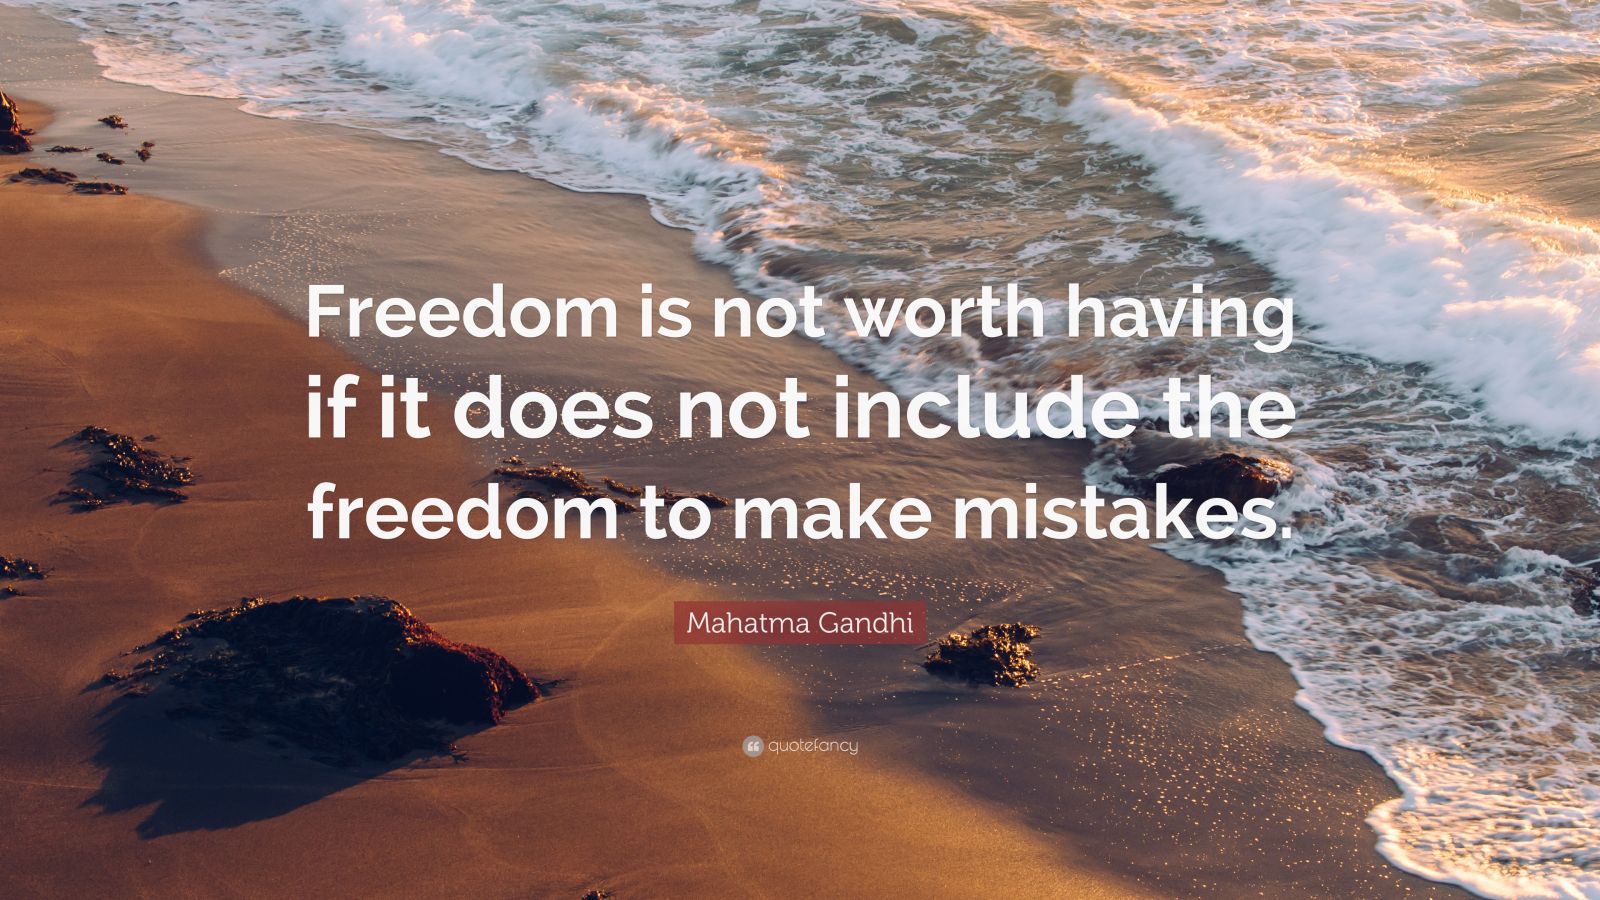 mahatma-gandhi-quote-freedom-is-not-worth-having-if-it-does-not